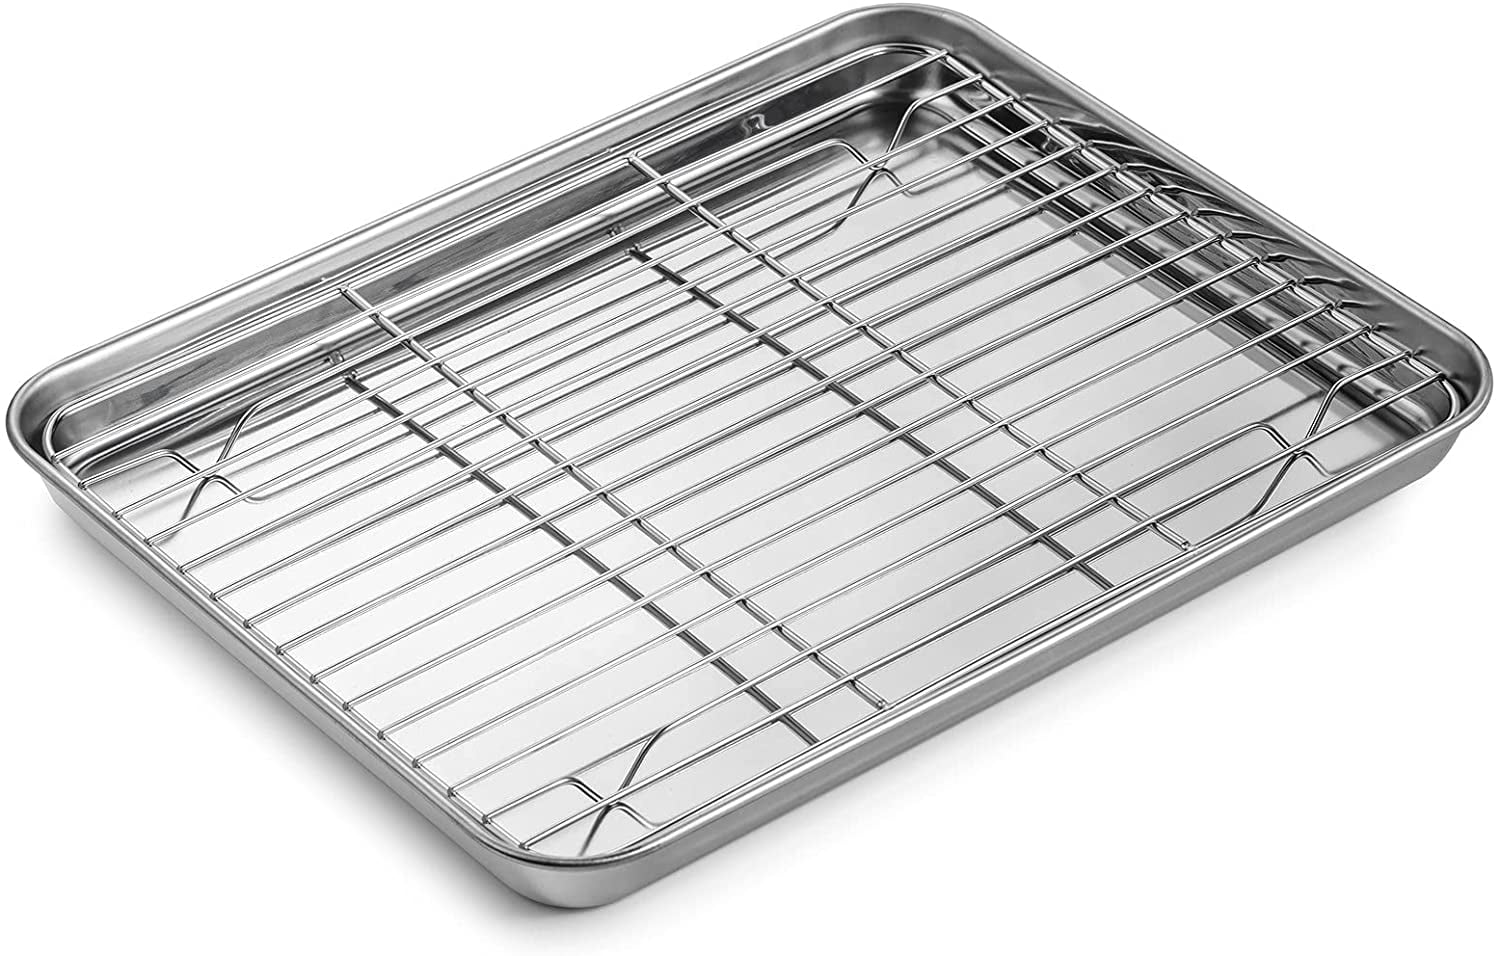 Stainless Steel Baking Sheet with Rack Set Tray Cookie Sheet & Oven 12 inch 